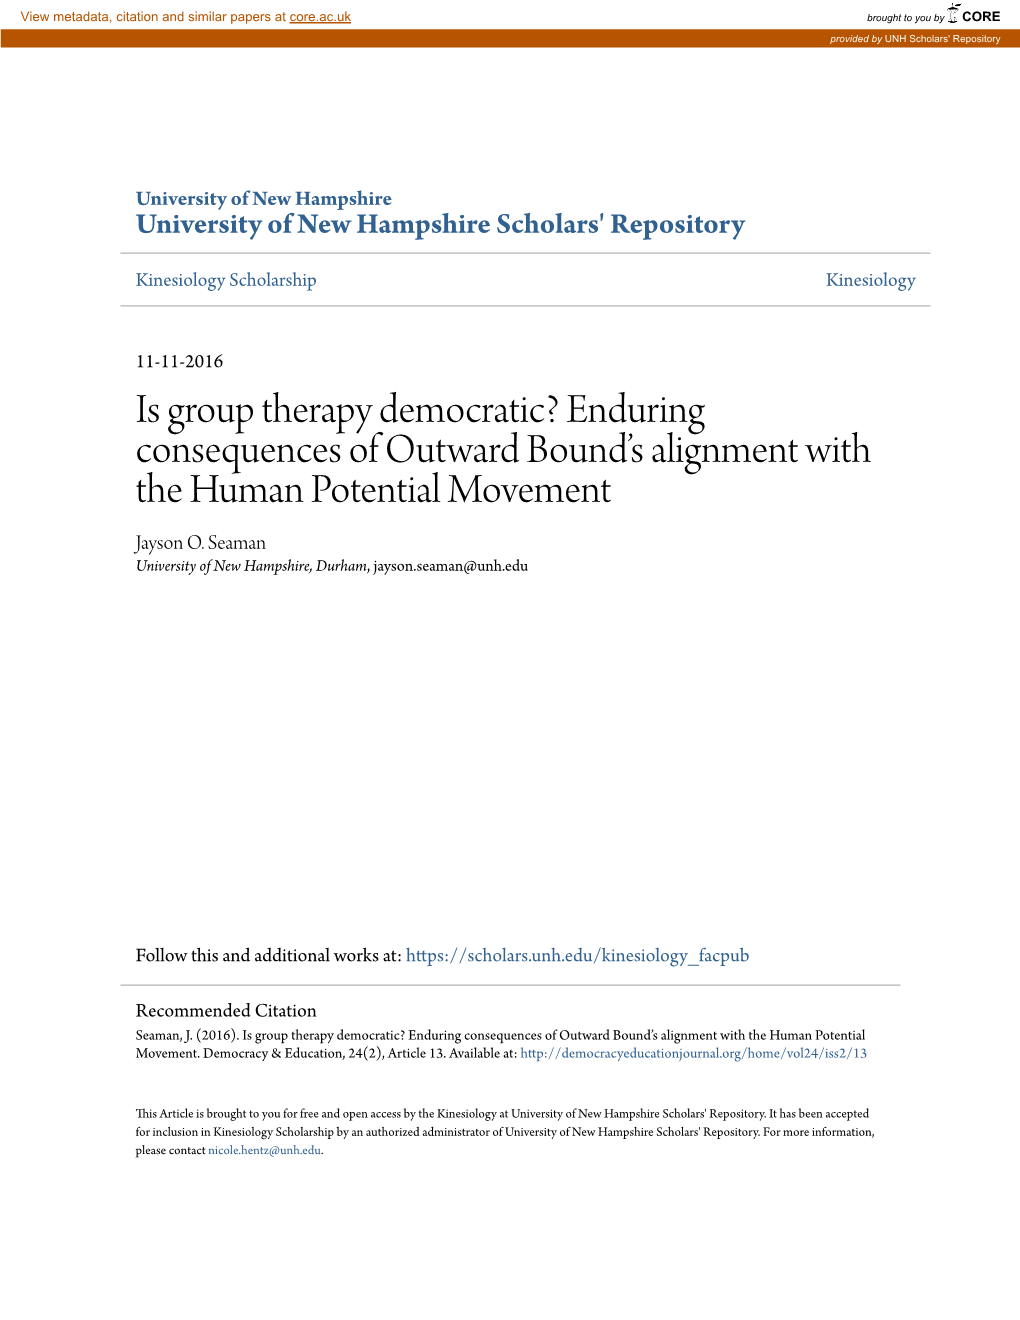 Is Group Therapy Democratic? Enduring Consequences of Outward Bound’S Alignment with the Human Potential Movement Jayson O